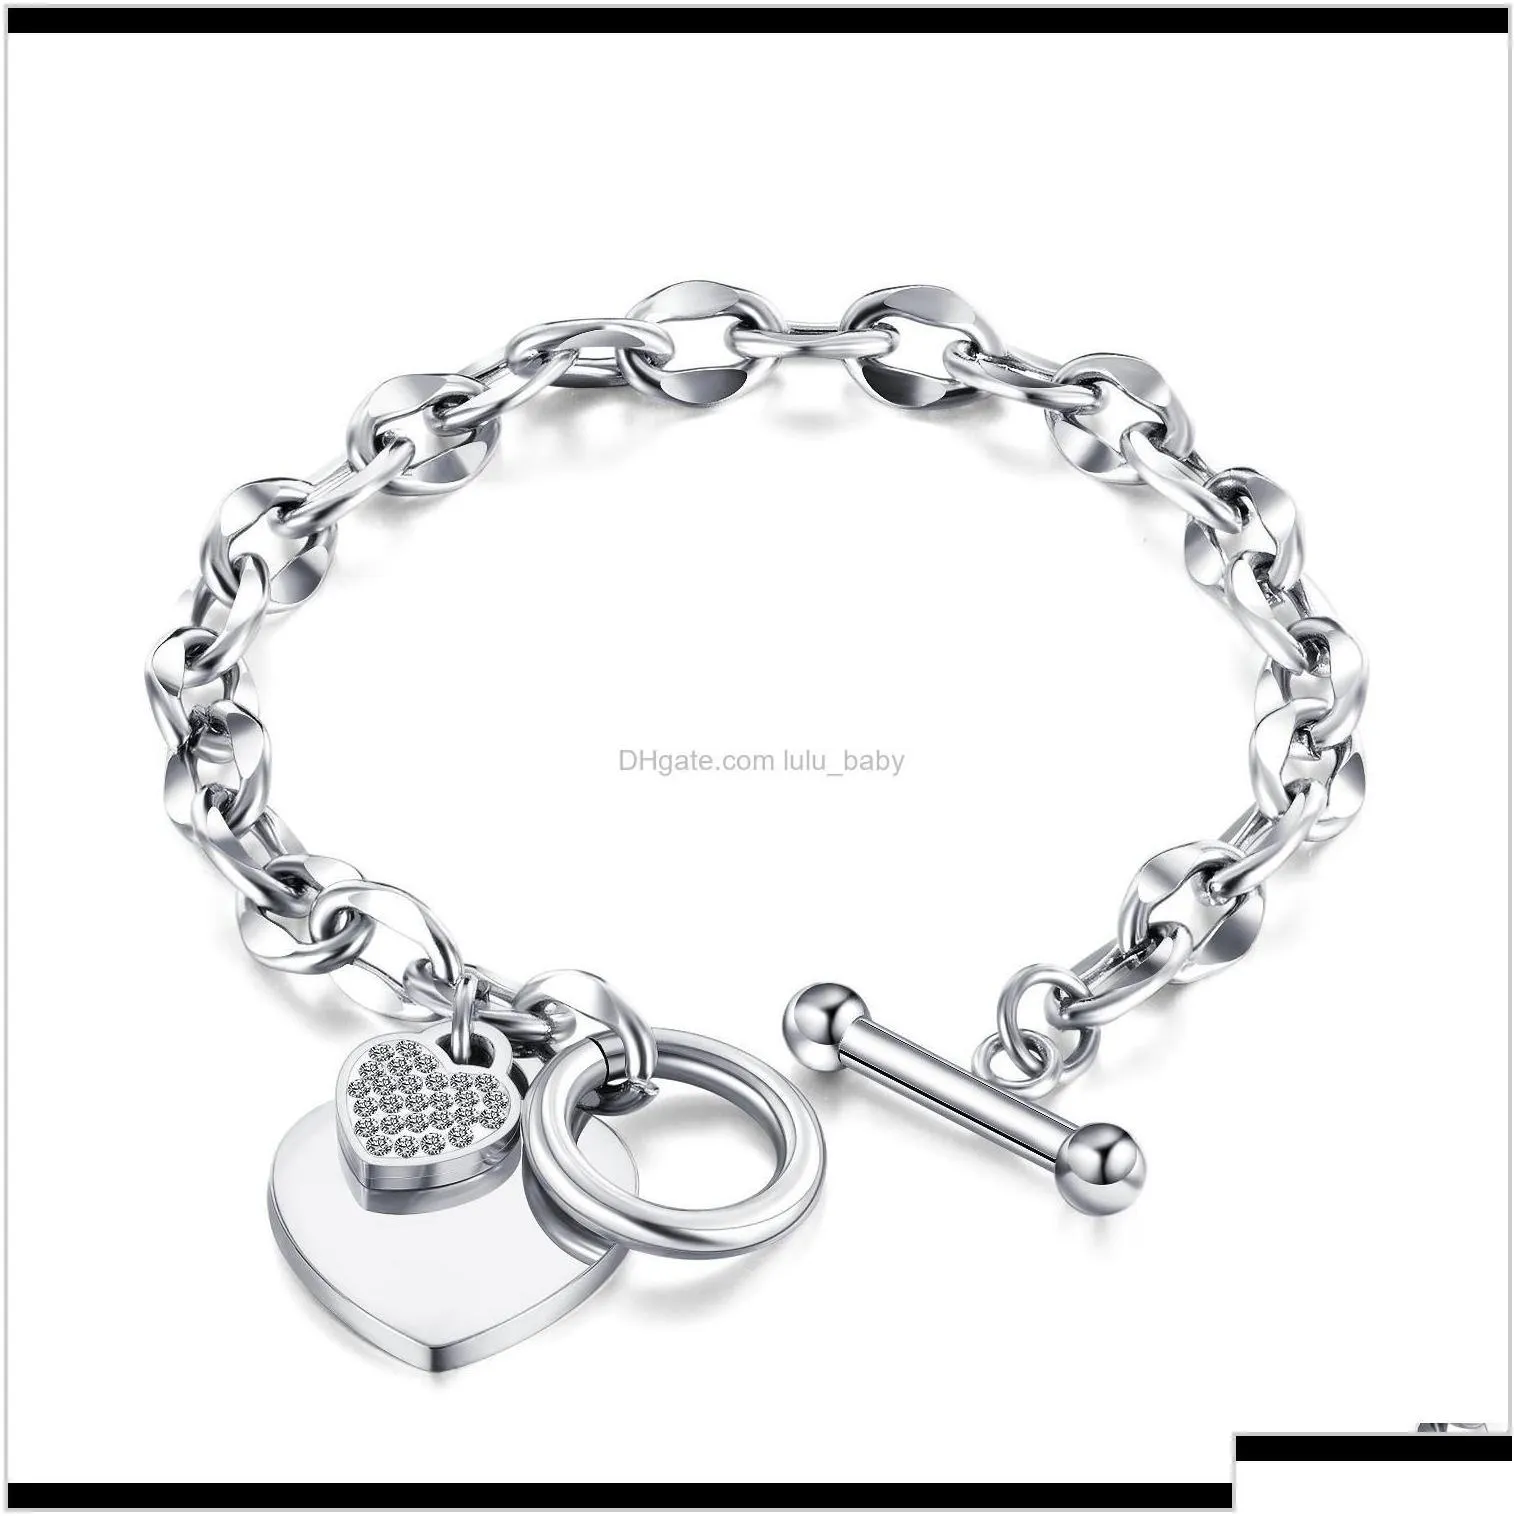 Diamond Zirconia Heart Charms Fashion Designer 316L Stainless Steel Link Chain Jewelry For Woman Girls Gifts Rose 9Yen6 Charm Bracelet